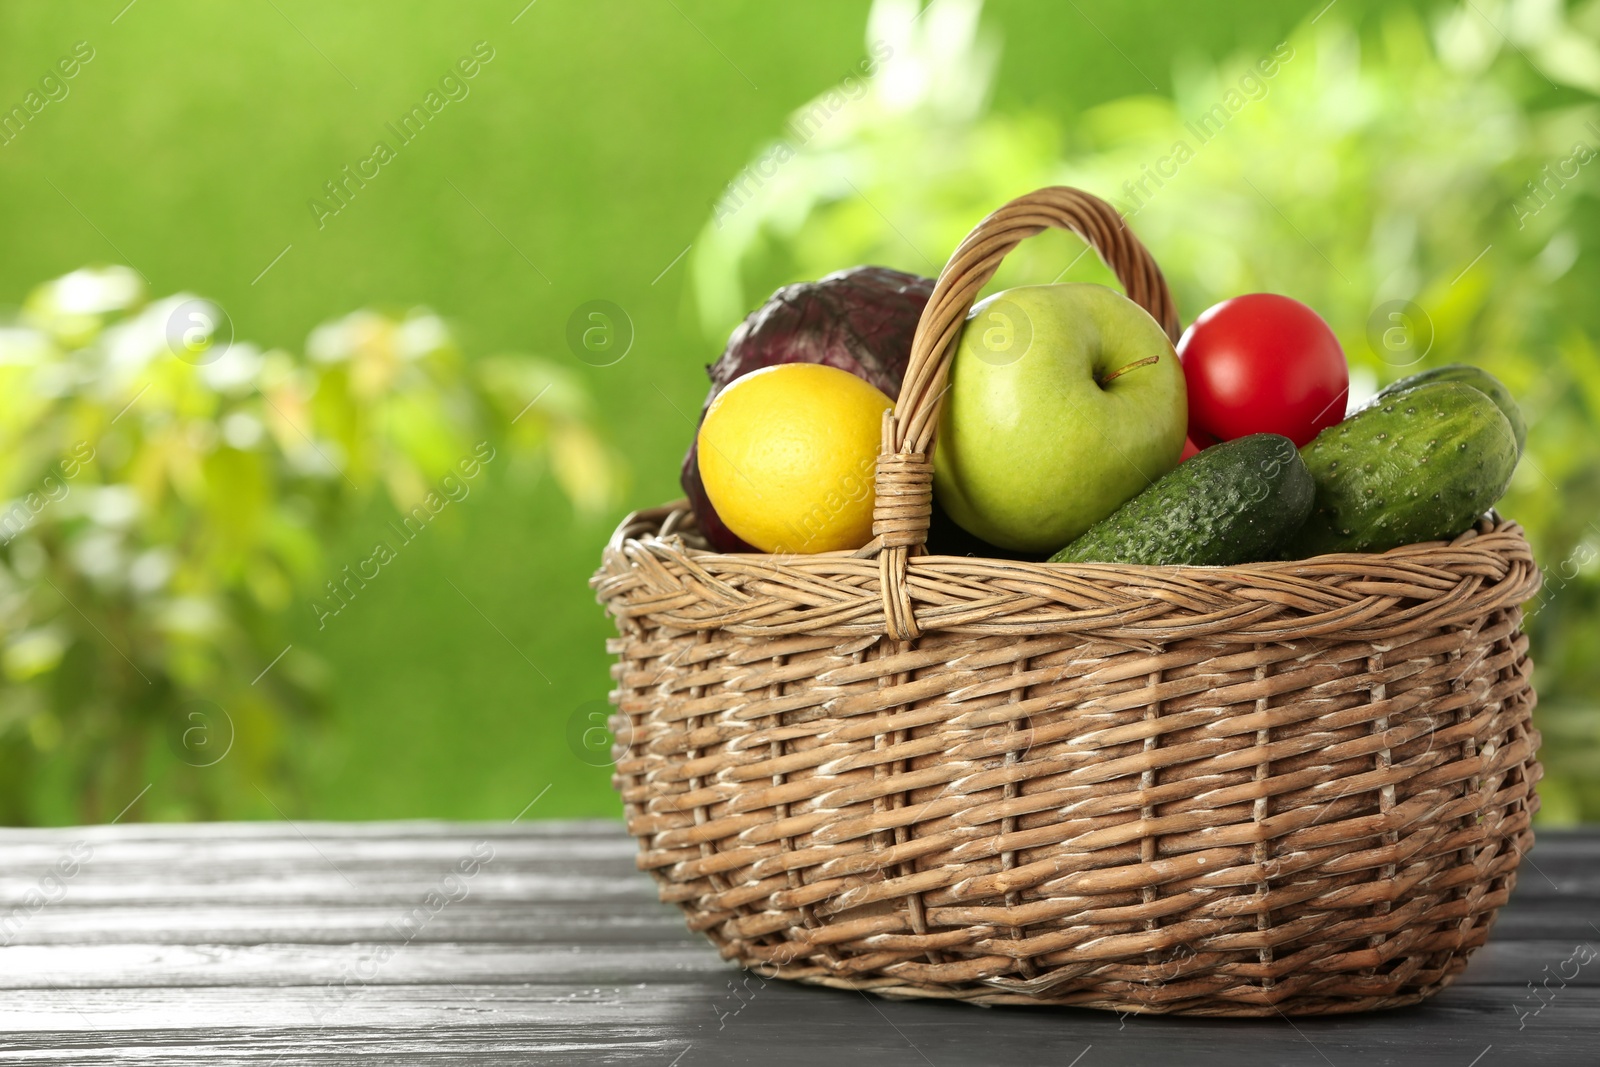 Photo of Basket full of fresh vegetables and fruits on table outdoors, space for text